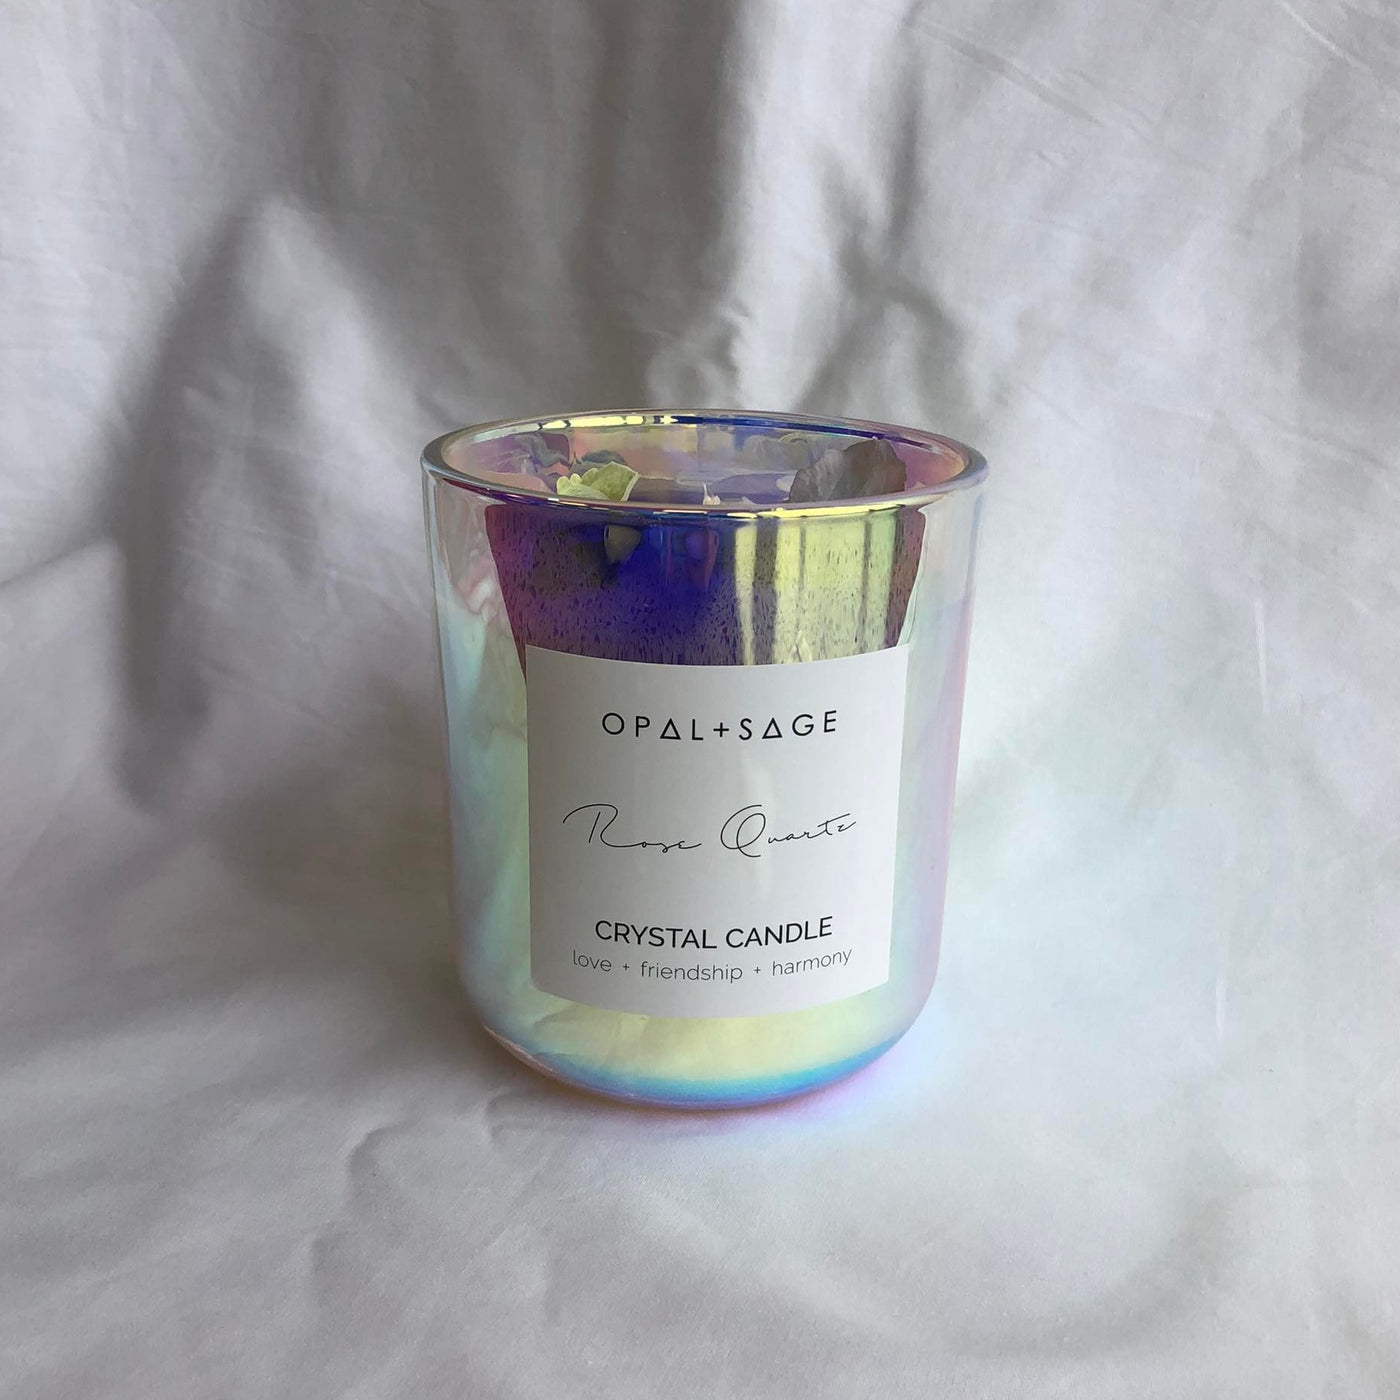 OPAL + SAGE DREAM JAR CANDLE  The Opal + Sage Dream Jar Candles are scented candles, decorated with a crystal and botanical petals; now available in; Rose Quartz and Amethyst.  The Opal + Sage Dream Jar Candles is a luxury soy candle, which has a lustre effect once lit and is a great addition to any room, they also make wonderful gifts.  The Opal + Sage Rose Quartz Candle comes in an iridescent glass container and was hand poured with love in Mapua New Zealand. 